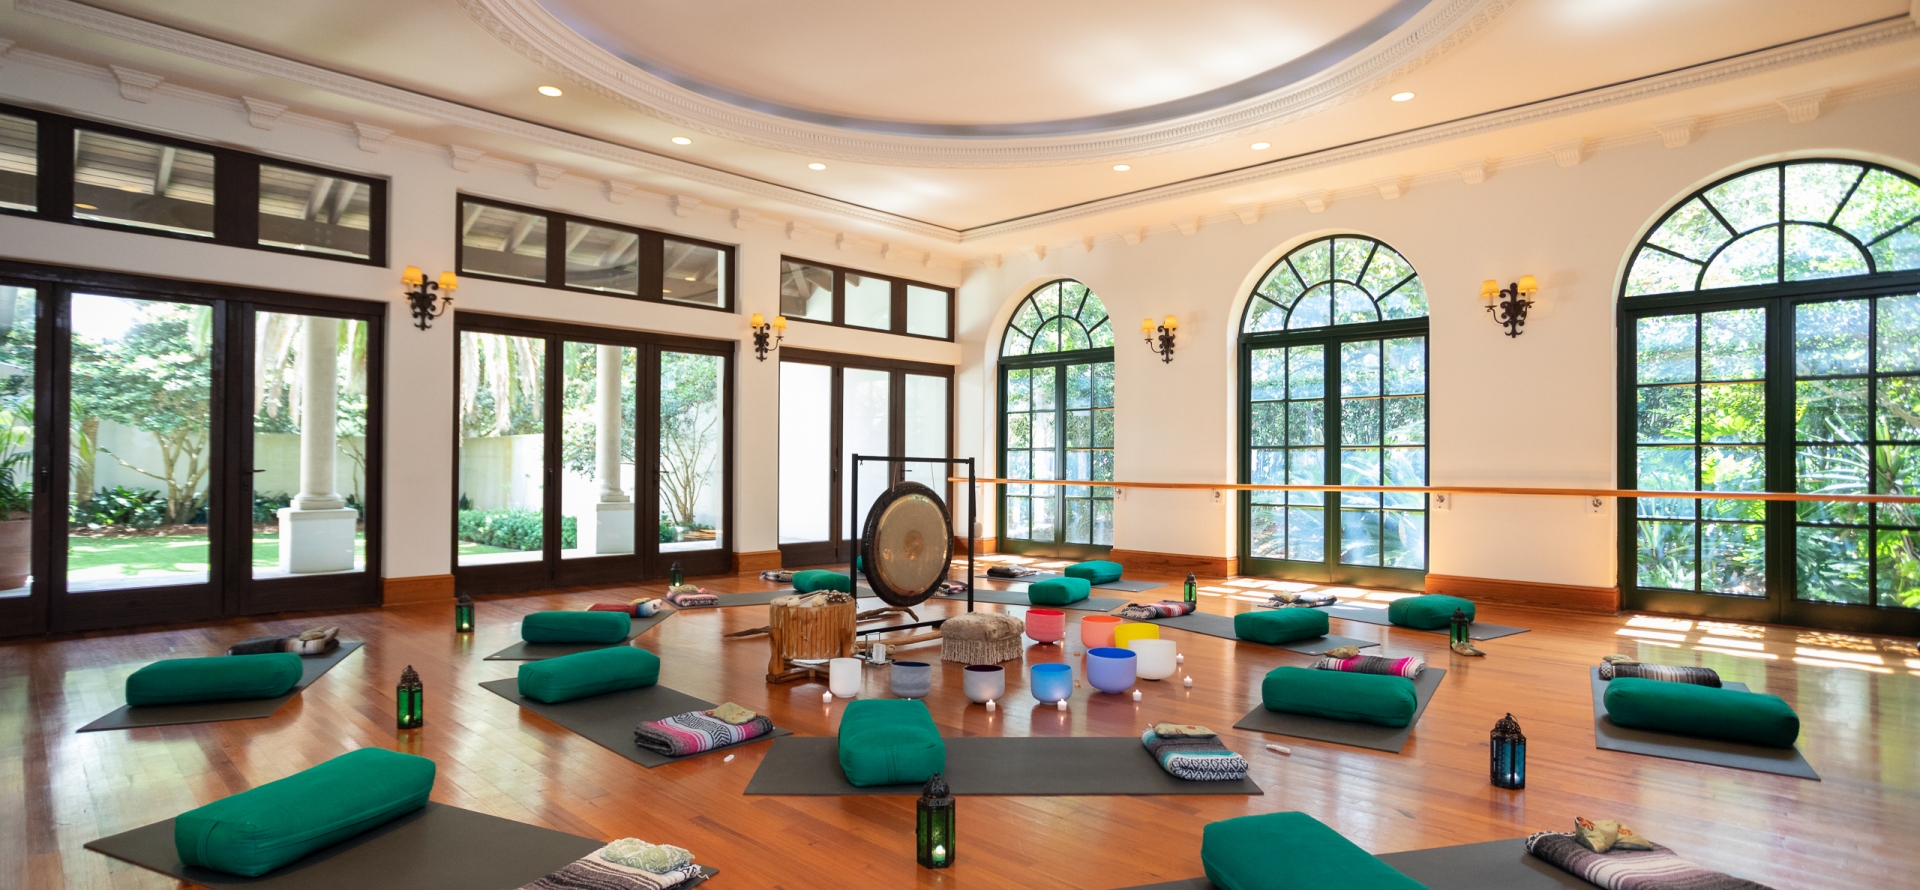 Sound meditation room with mats and singing bowls